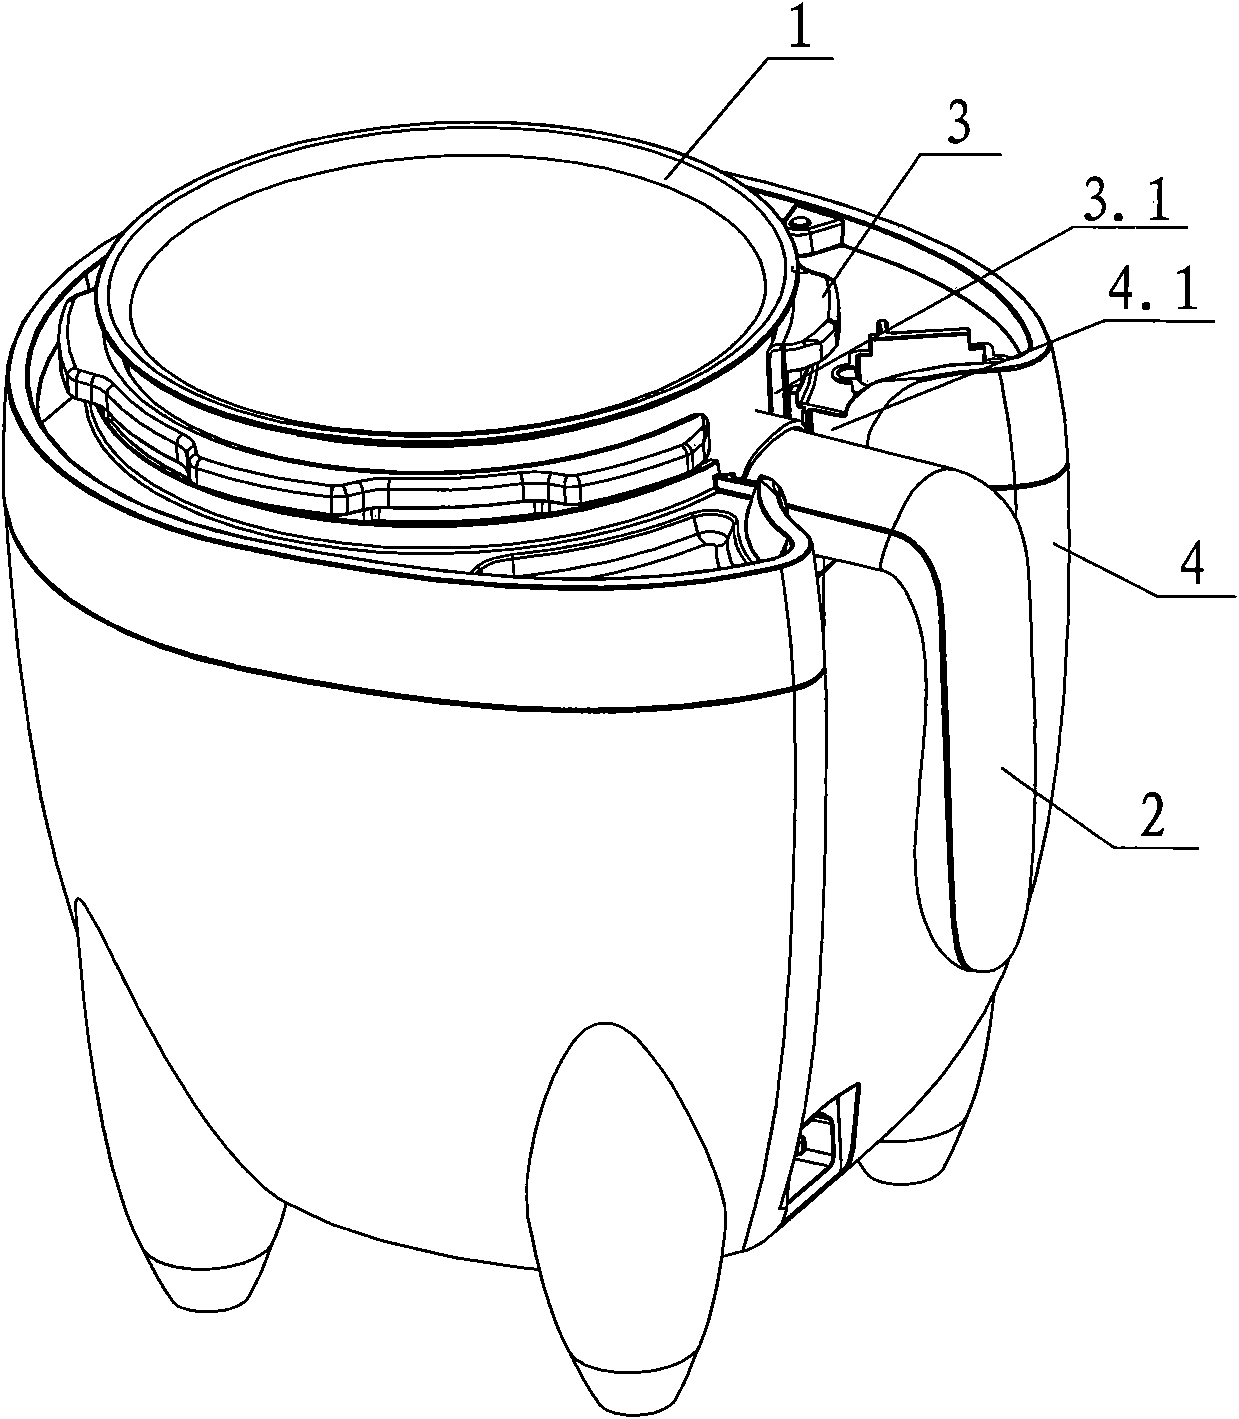 Electrical pressure cooking apparatus with internal pot with handle